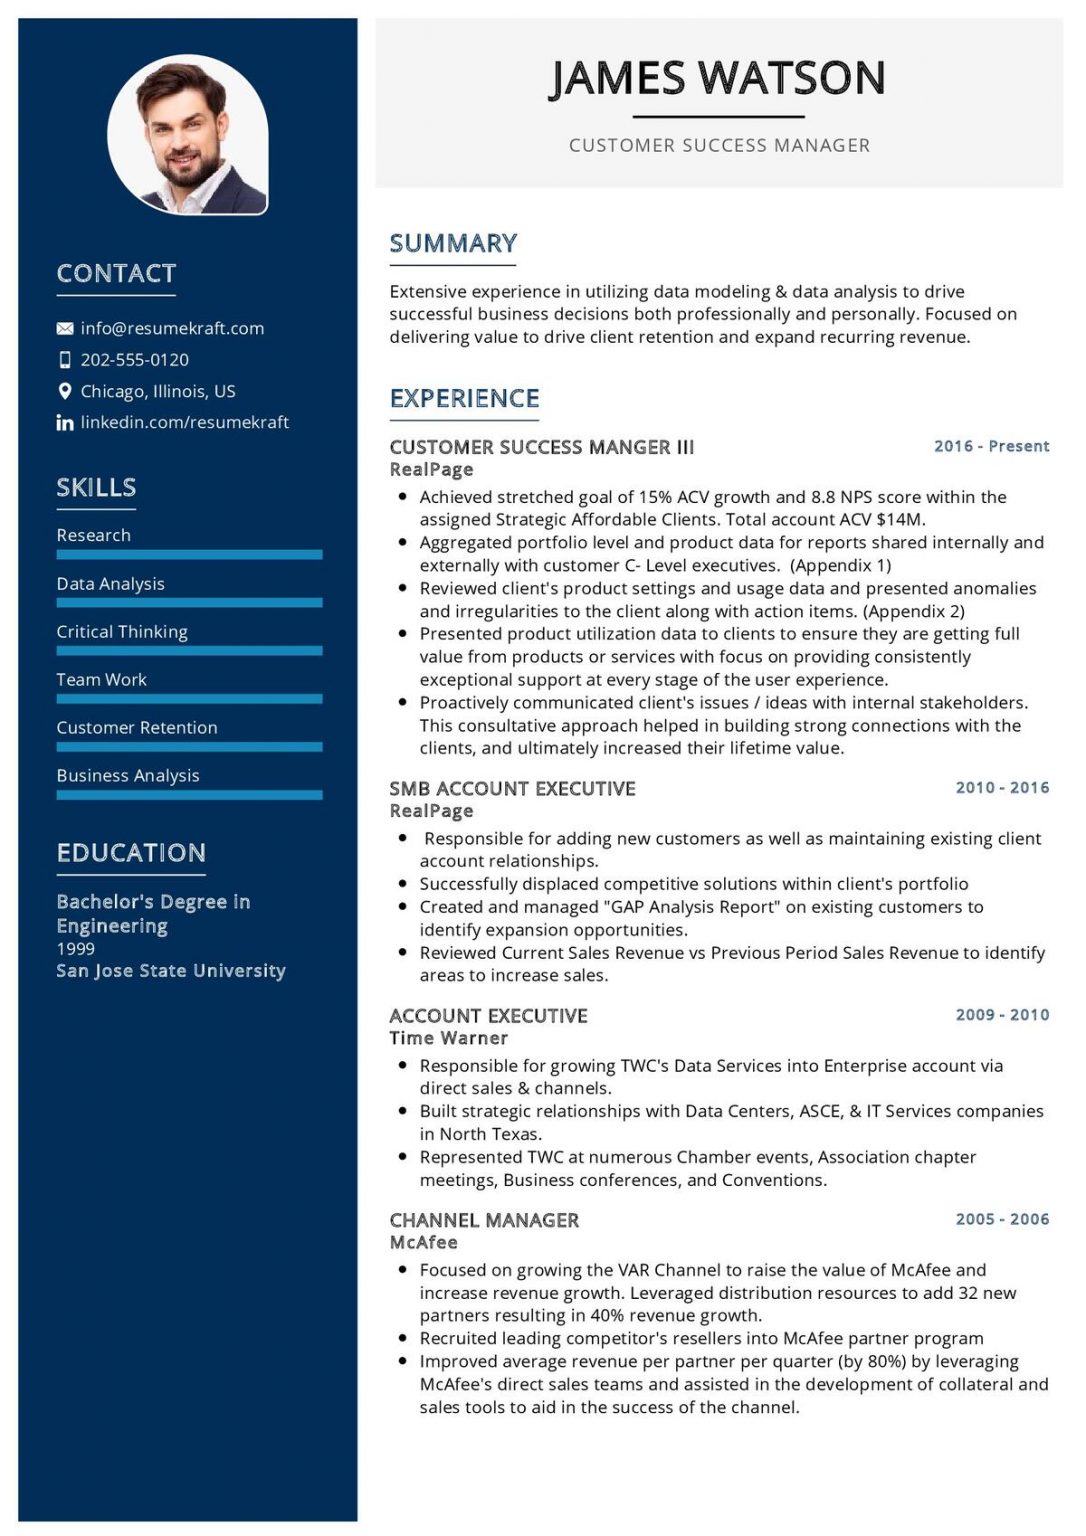 writing an effective resume